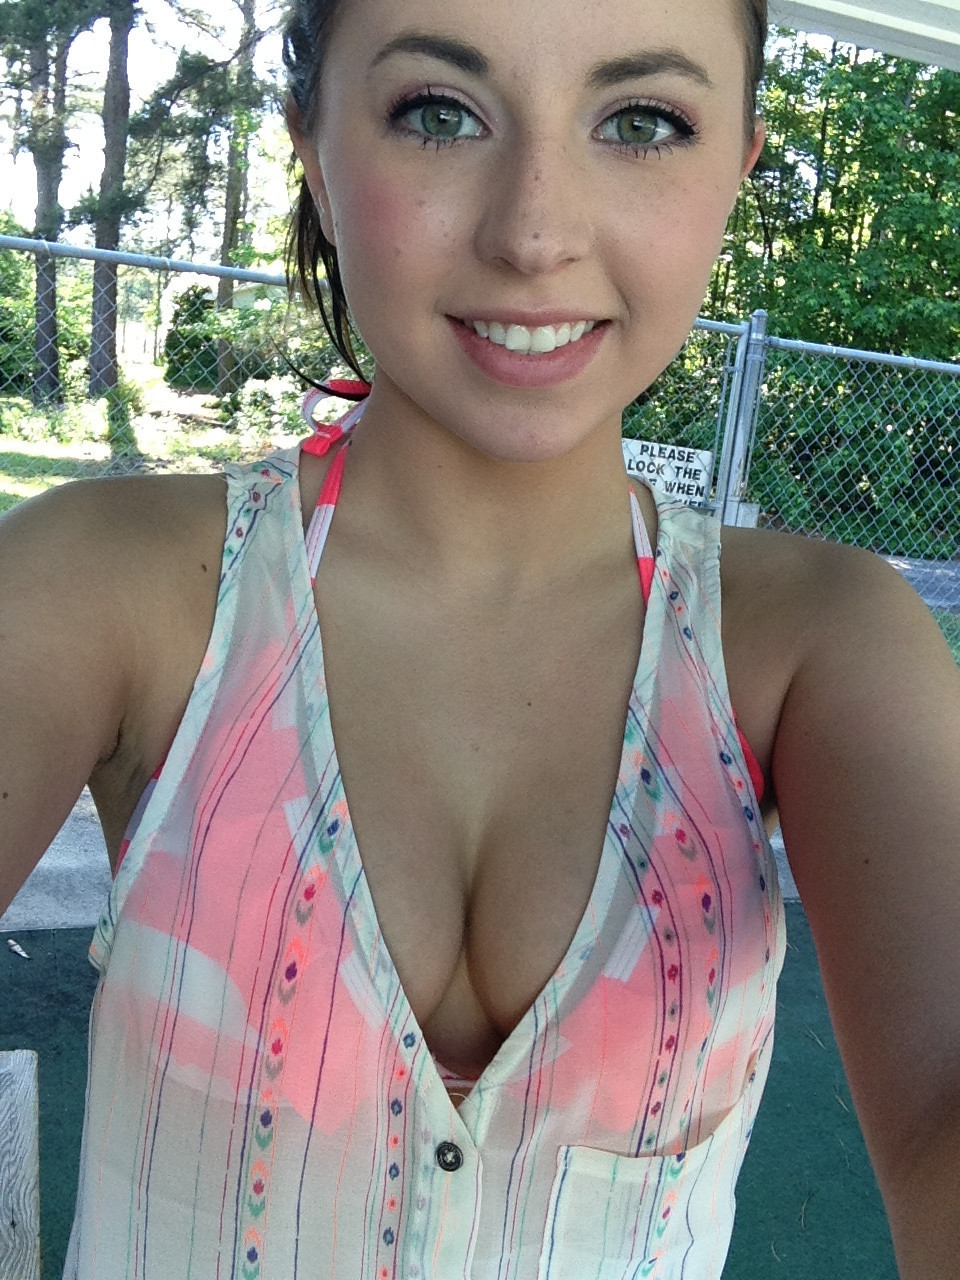 Cute teen girls with small boobs